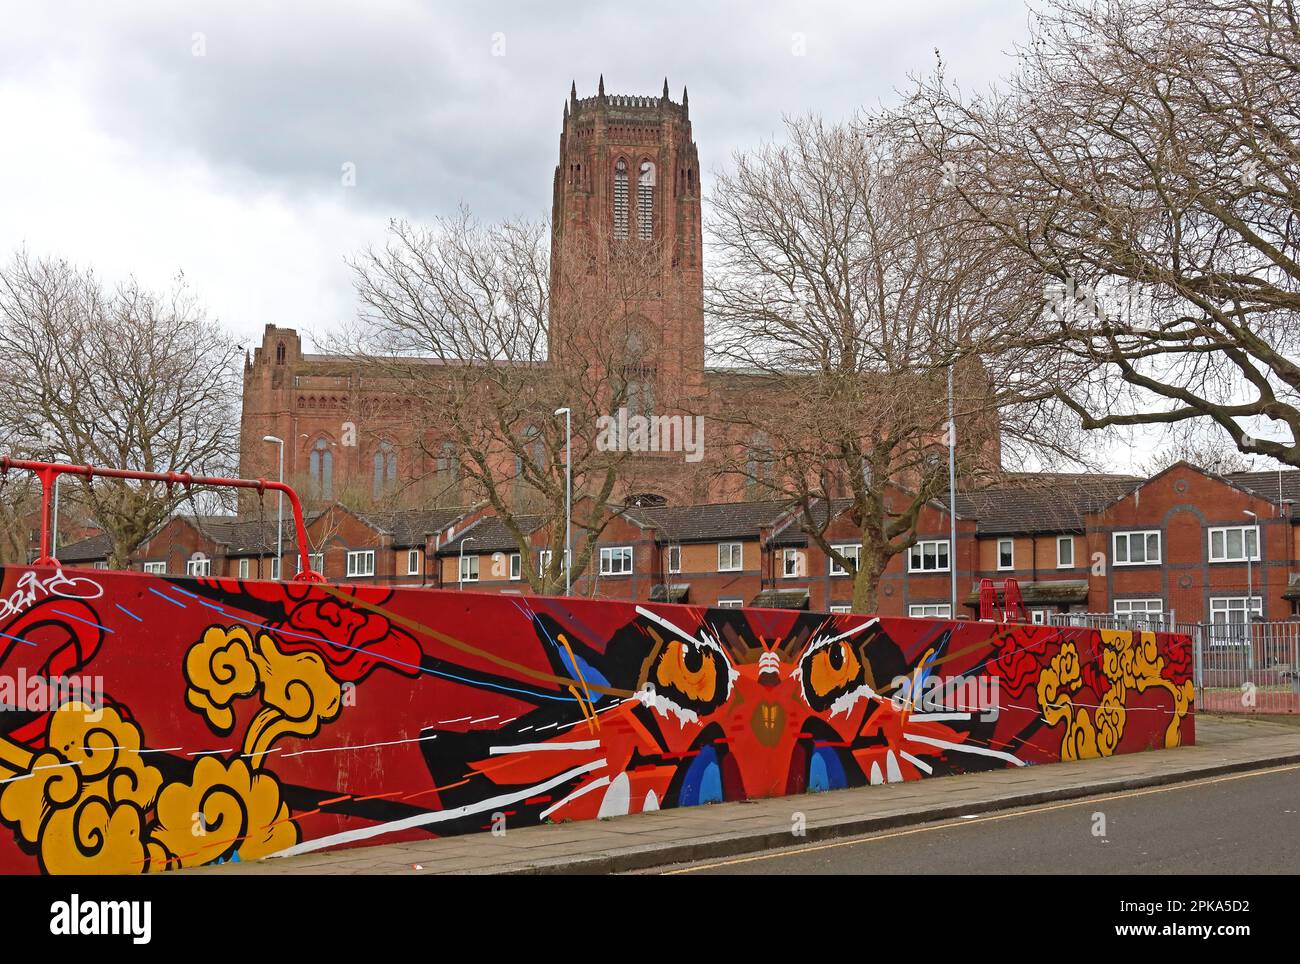 View of the Anglican cathedral from Chinatown, 29 ,Great George Street, play area, Liverpool, Merseyside, England, UK,  L1 5DZ Stock Photo